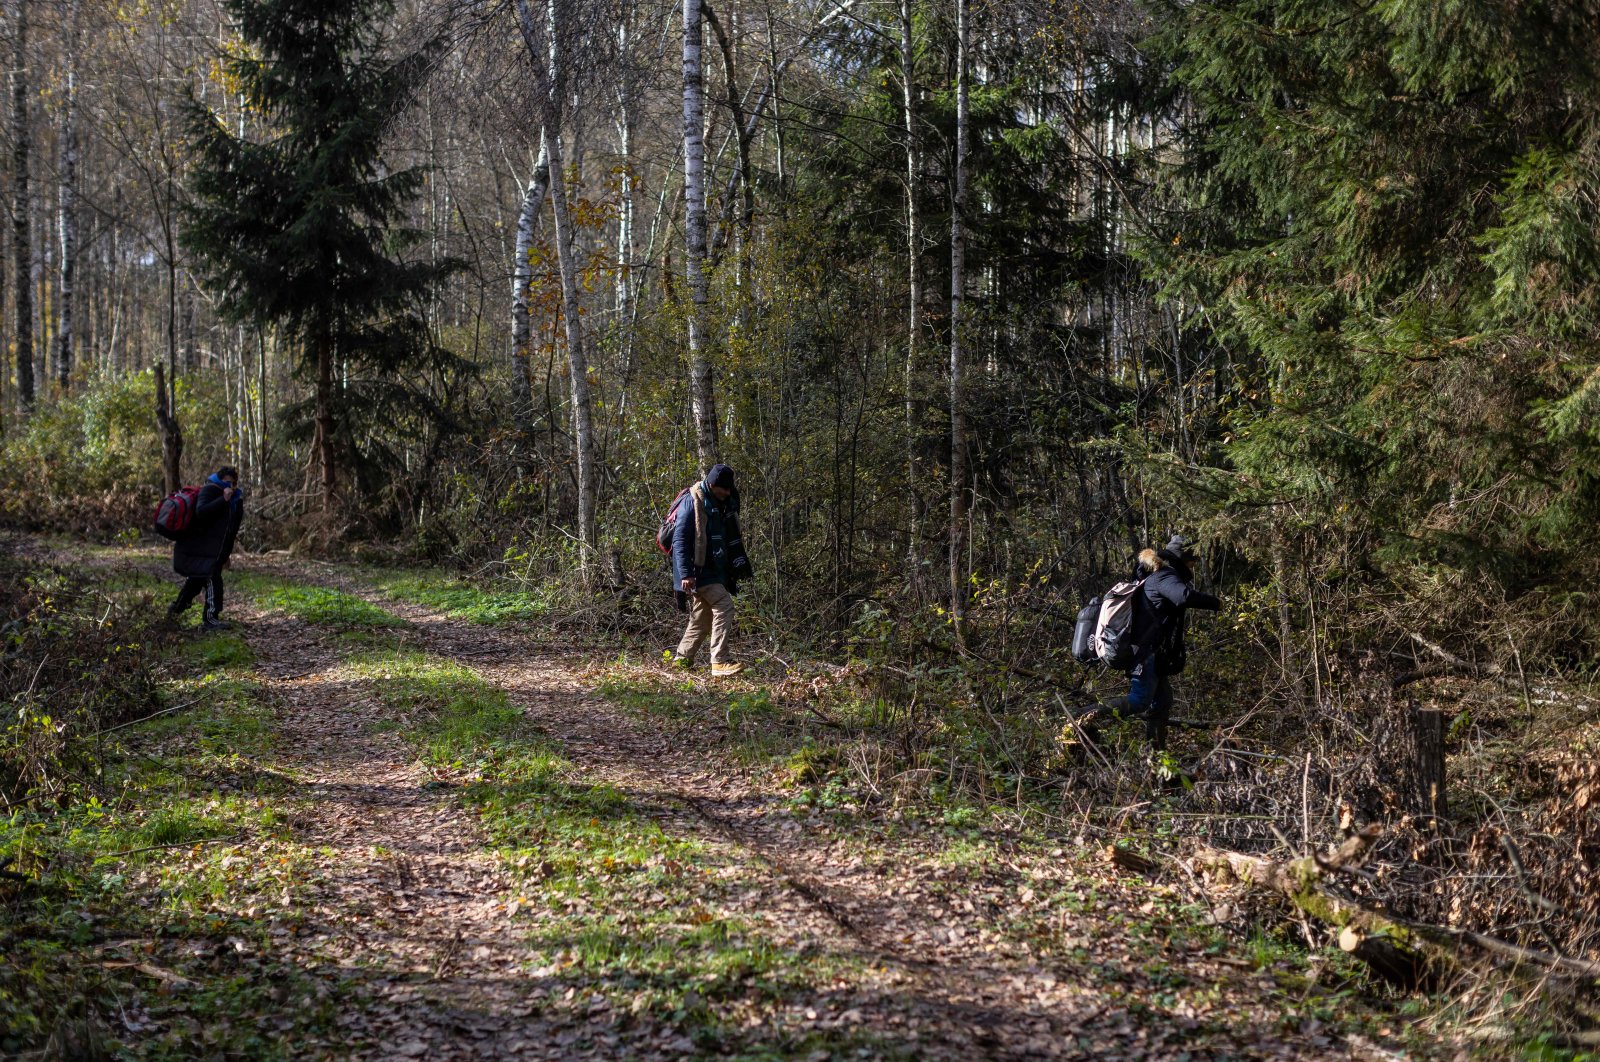 A group of migrants from Yemen are seen in the woods near Grodek, Poland, on Oct. 16, 2021. (AFP) 